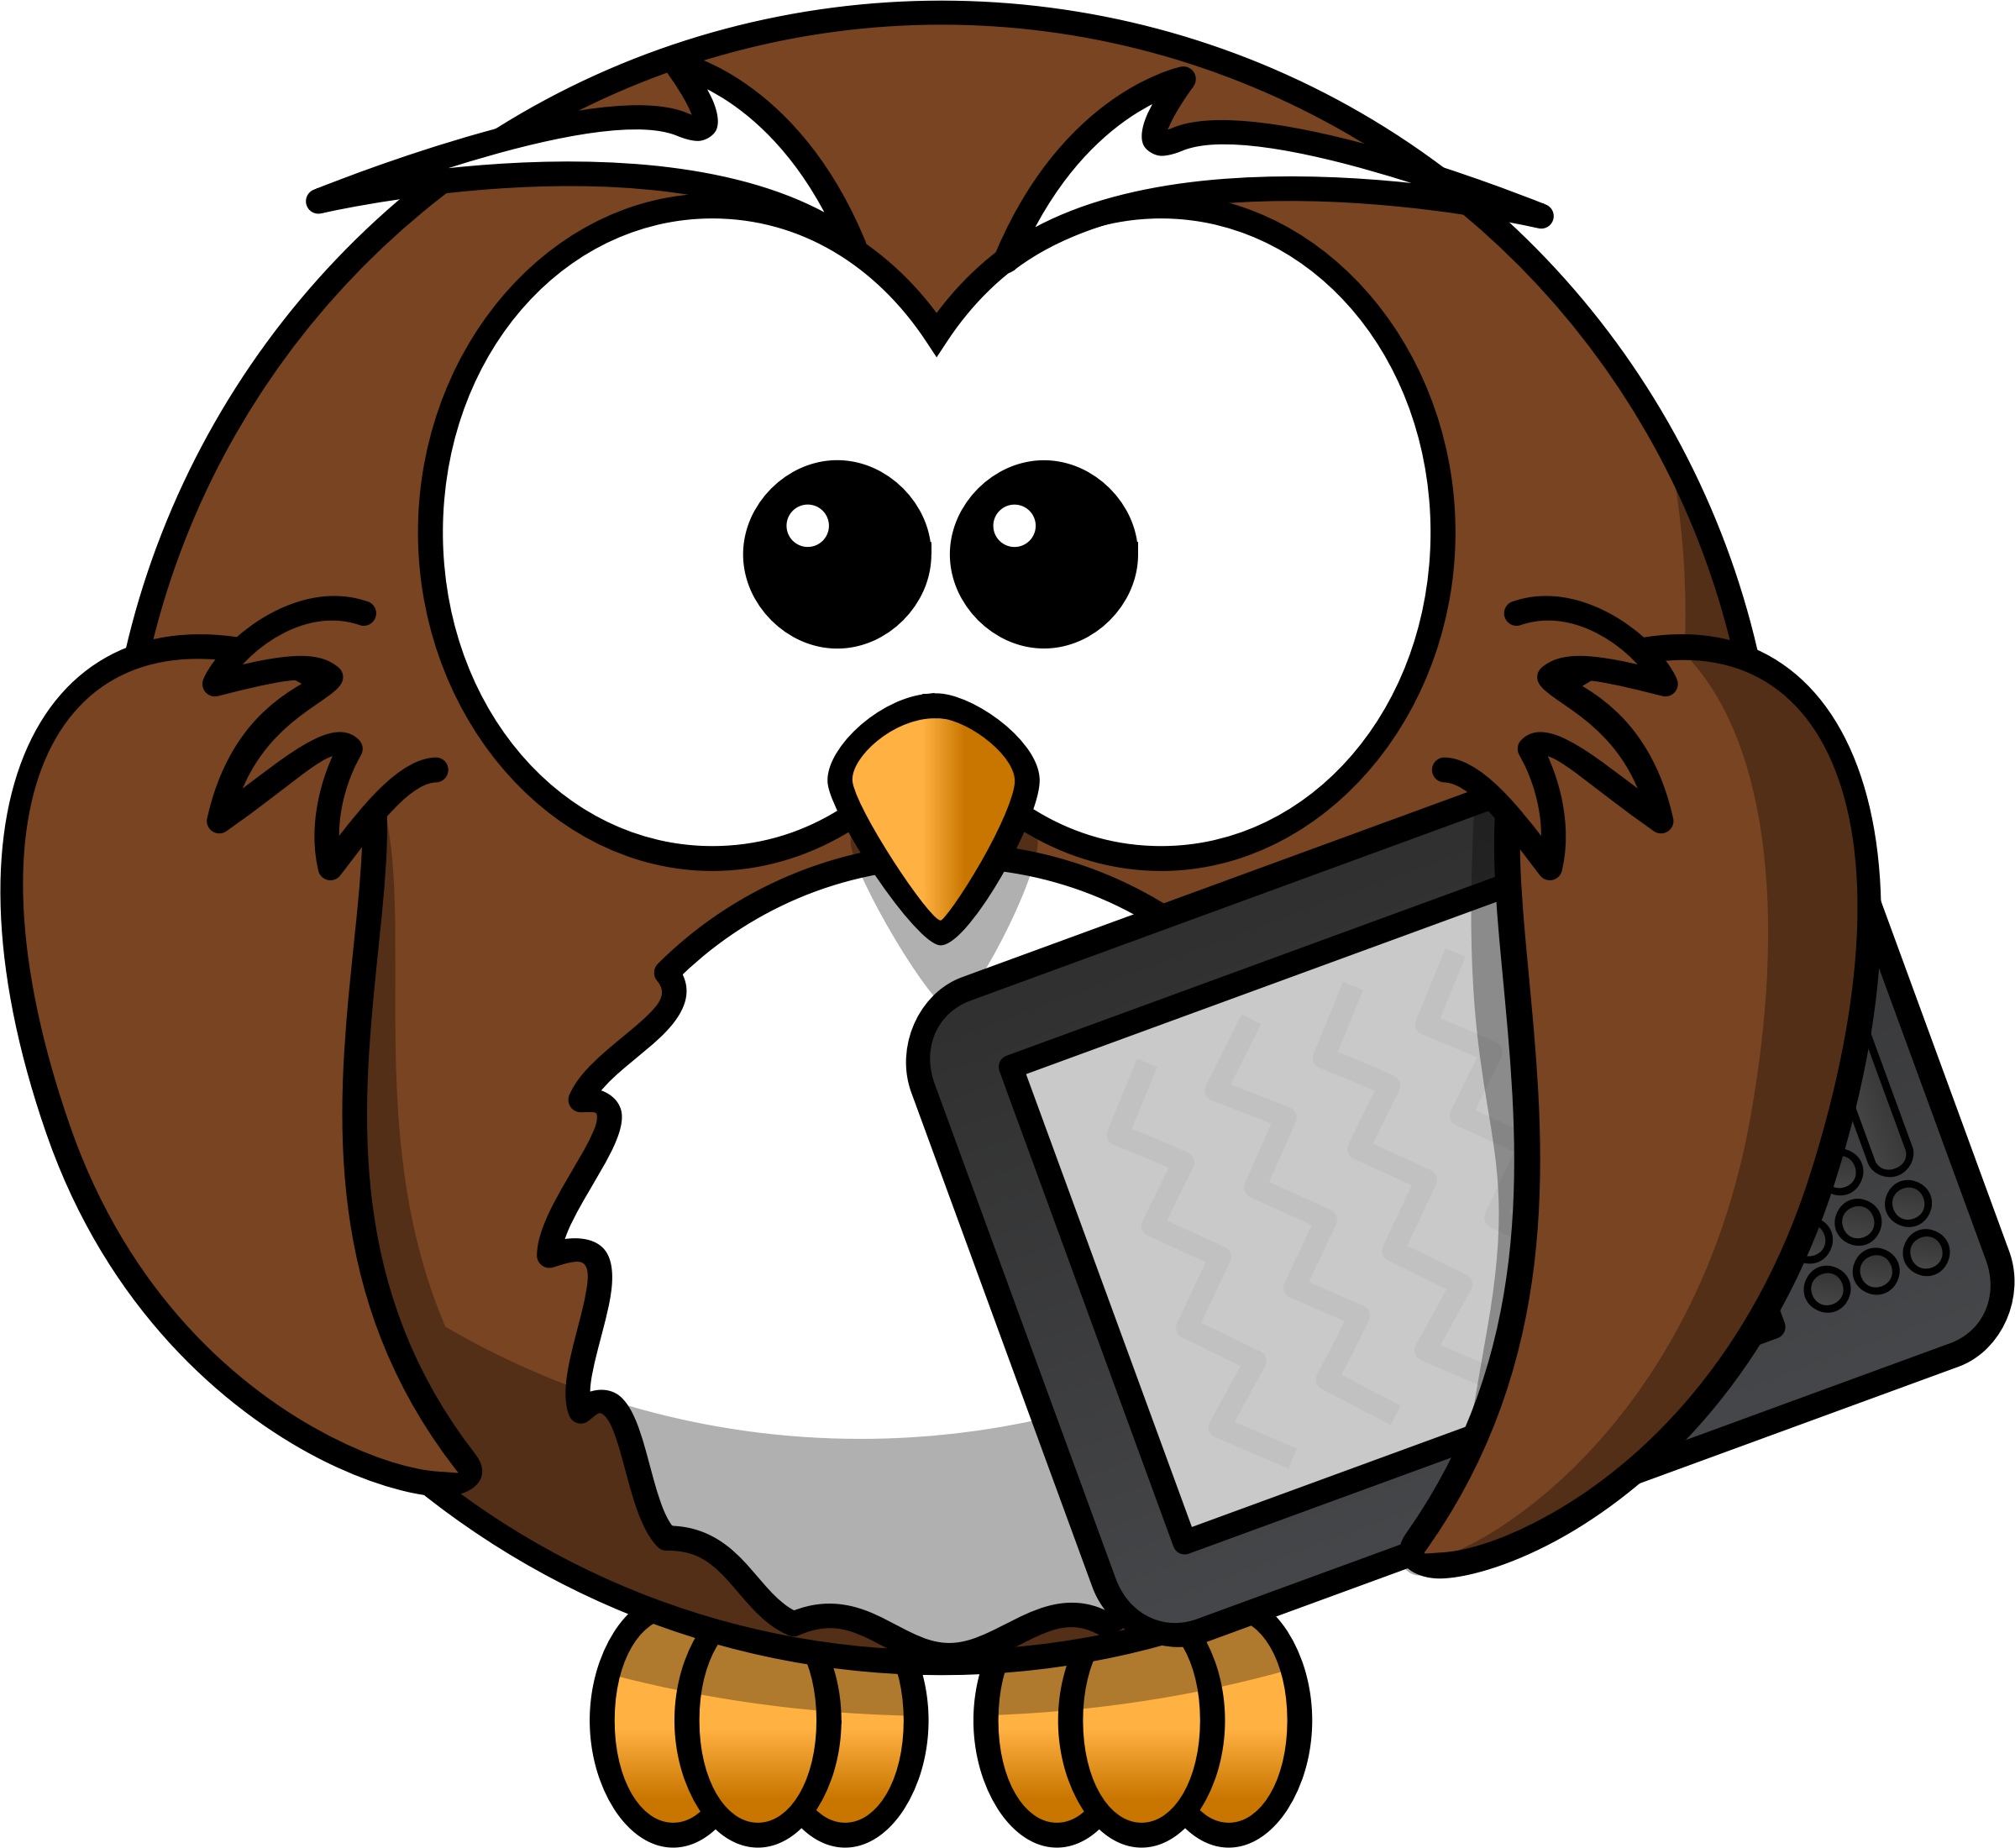 With ebook reader by. Hug clipart owl